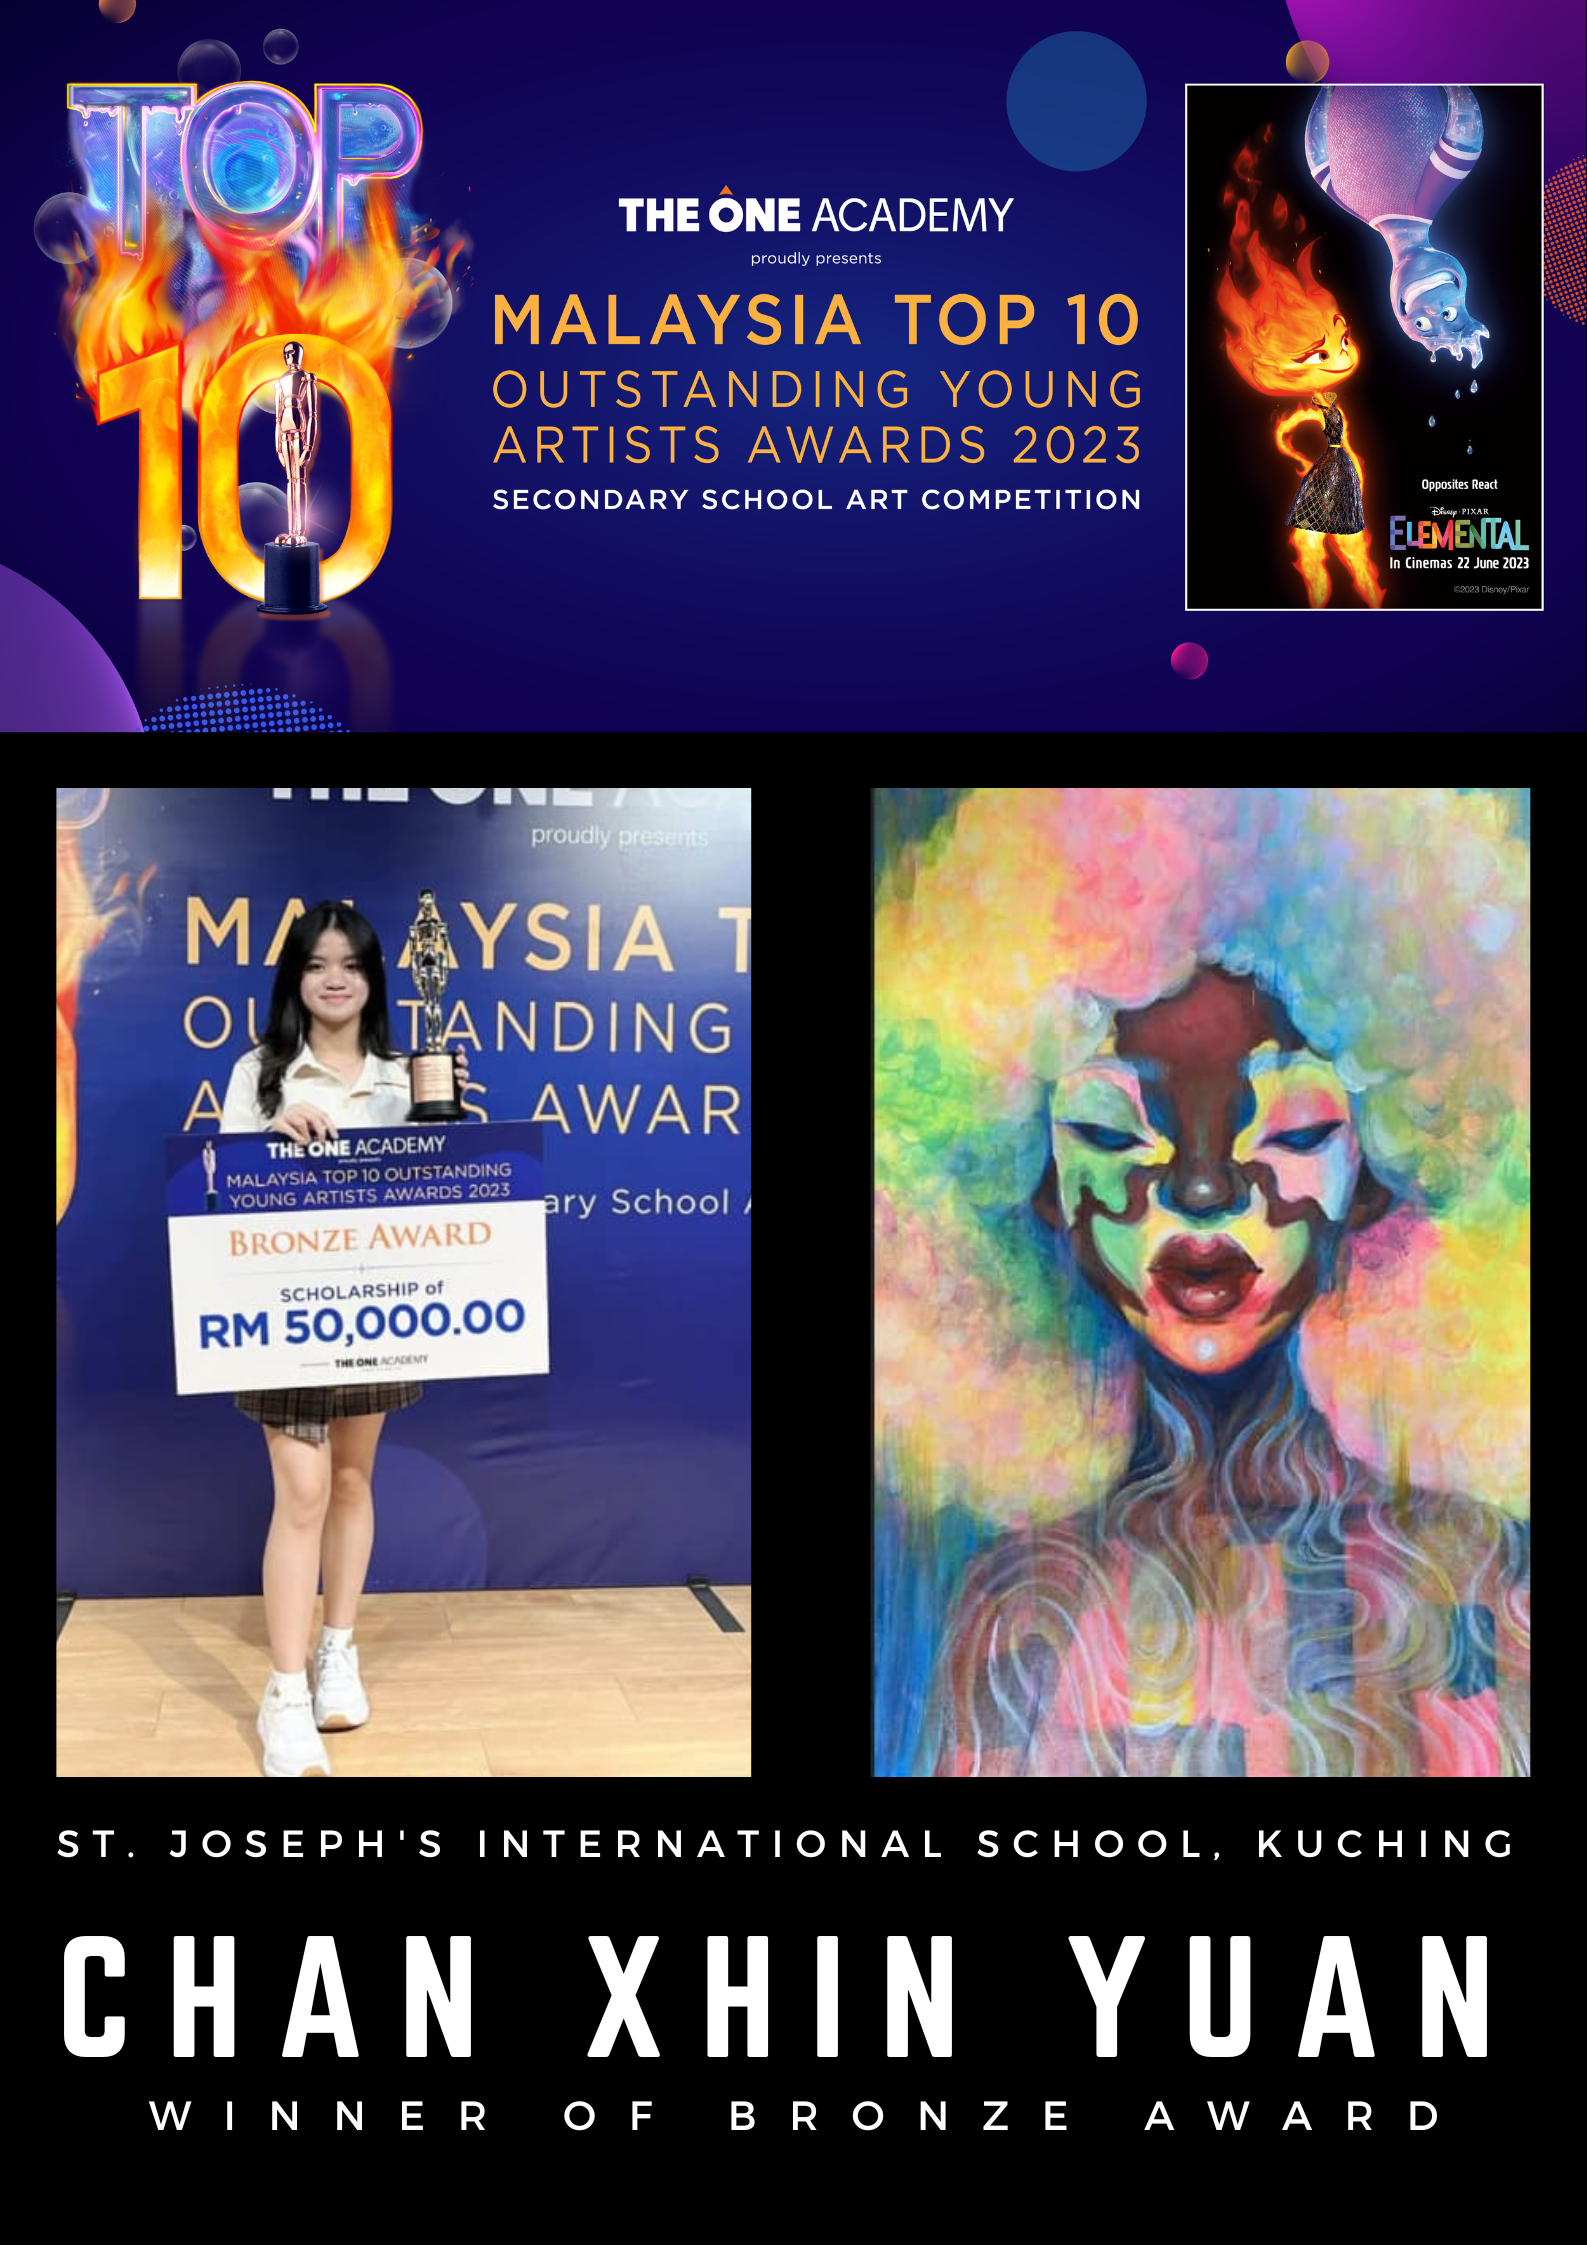 Top 10 Young Artist Award 2023 by the One Academy